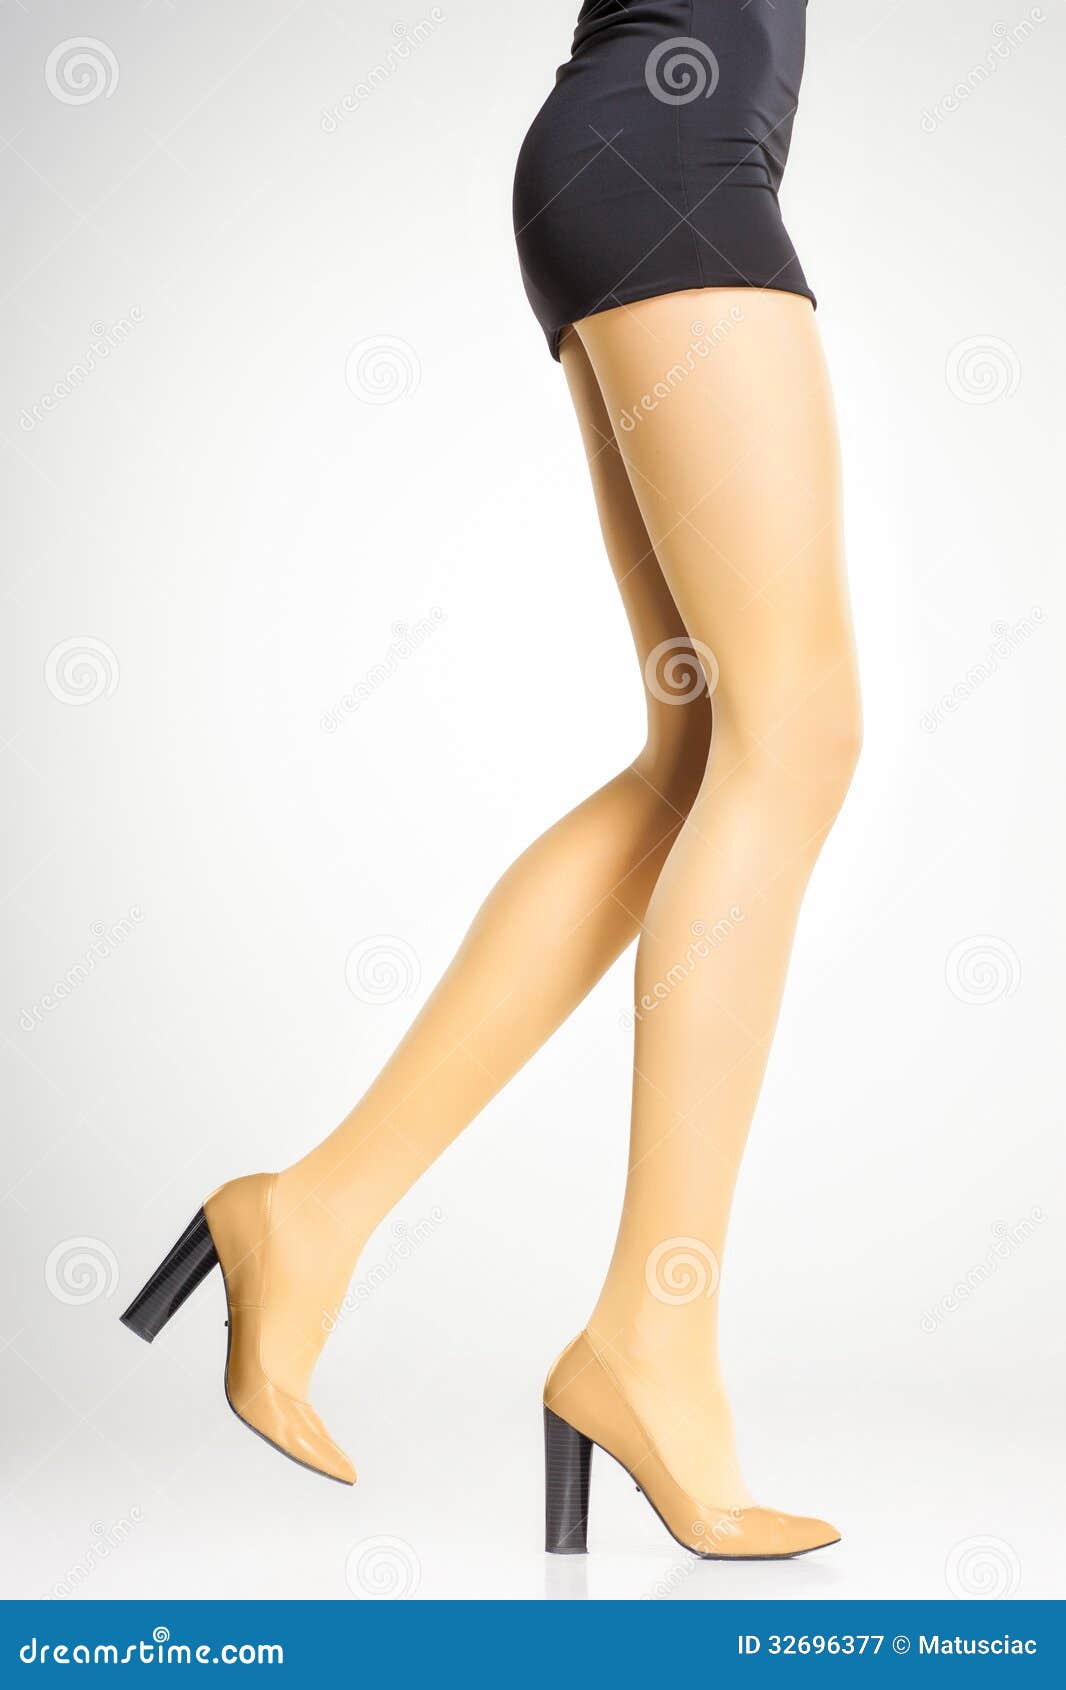 Yellow Stockings On Woman Legs On Grey Royalty Free Stock Photography ...